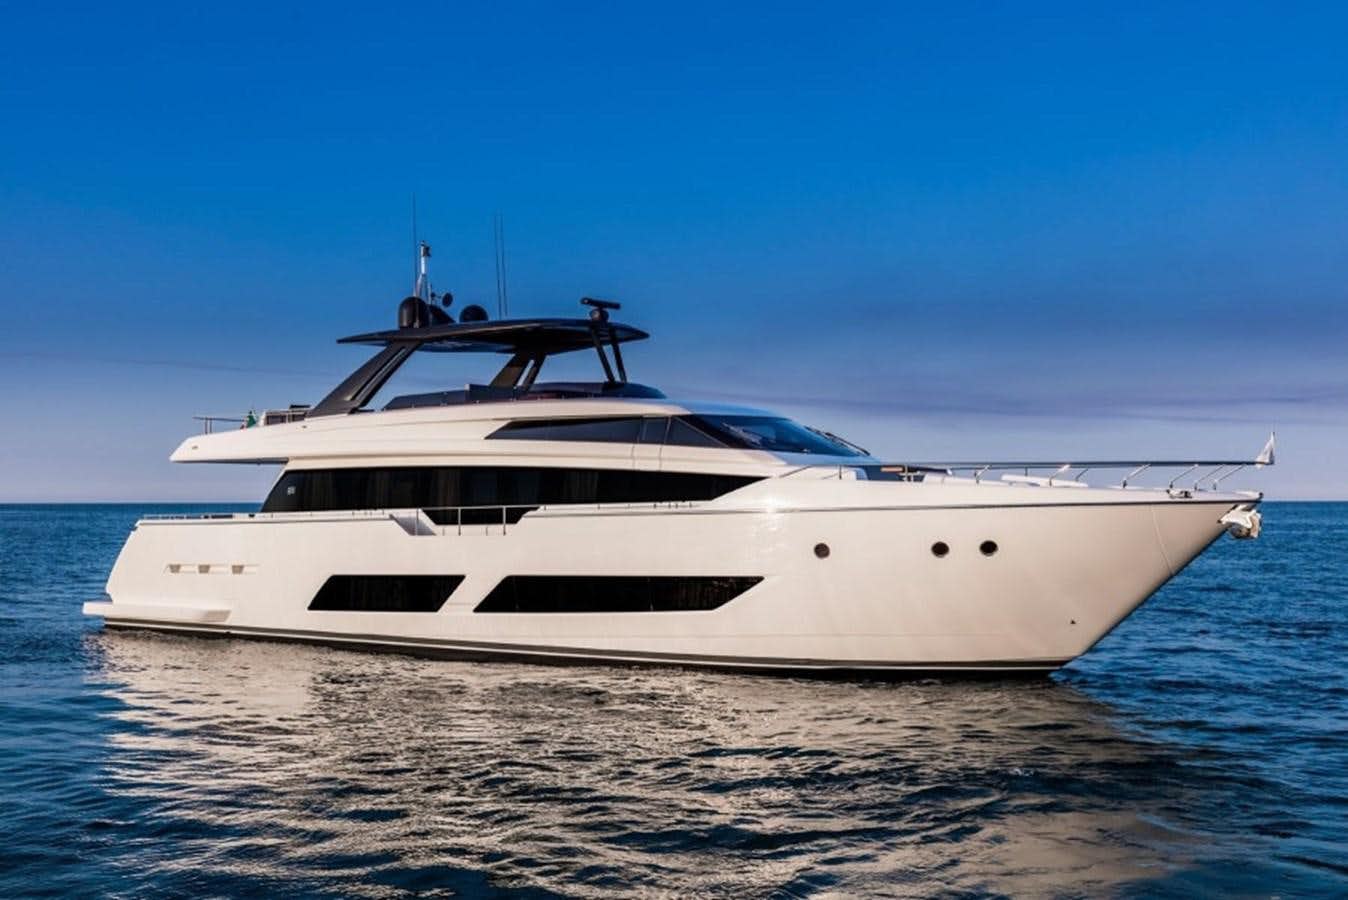 Watch Video for PINCH ME Yacht for Sale